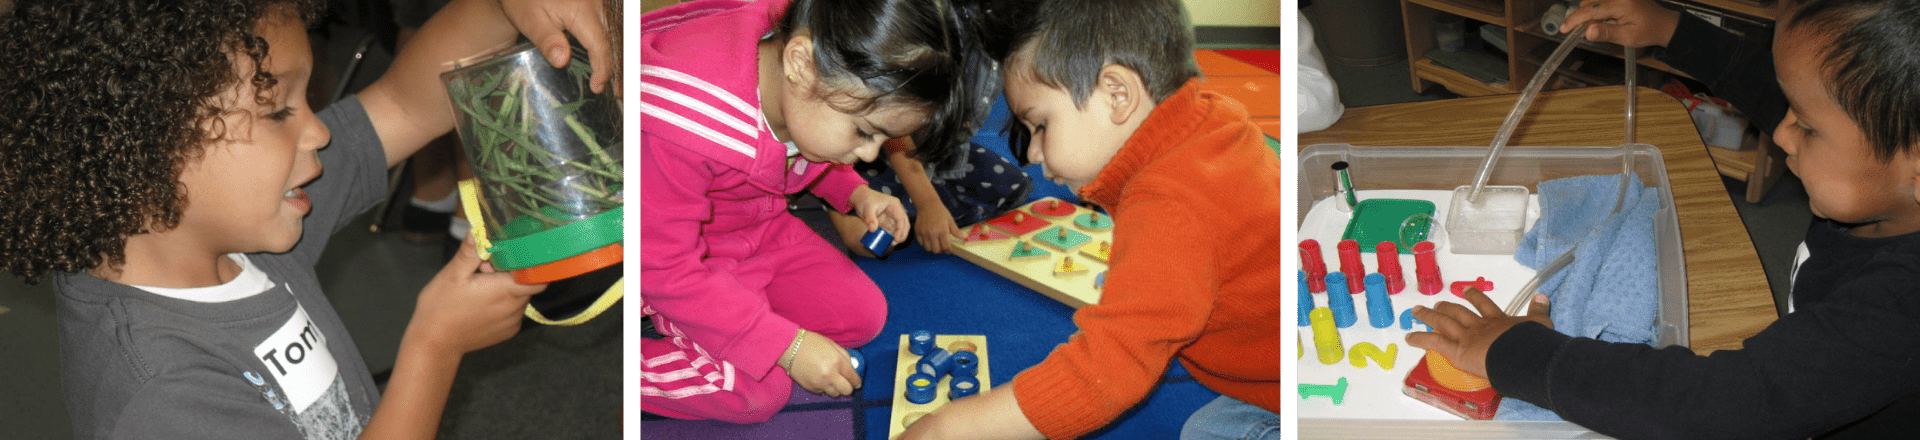 Young children learning through play and discussion